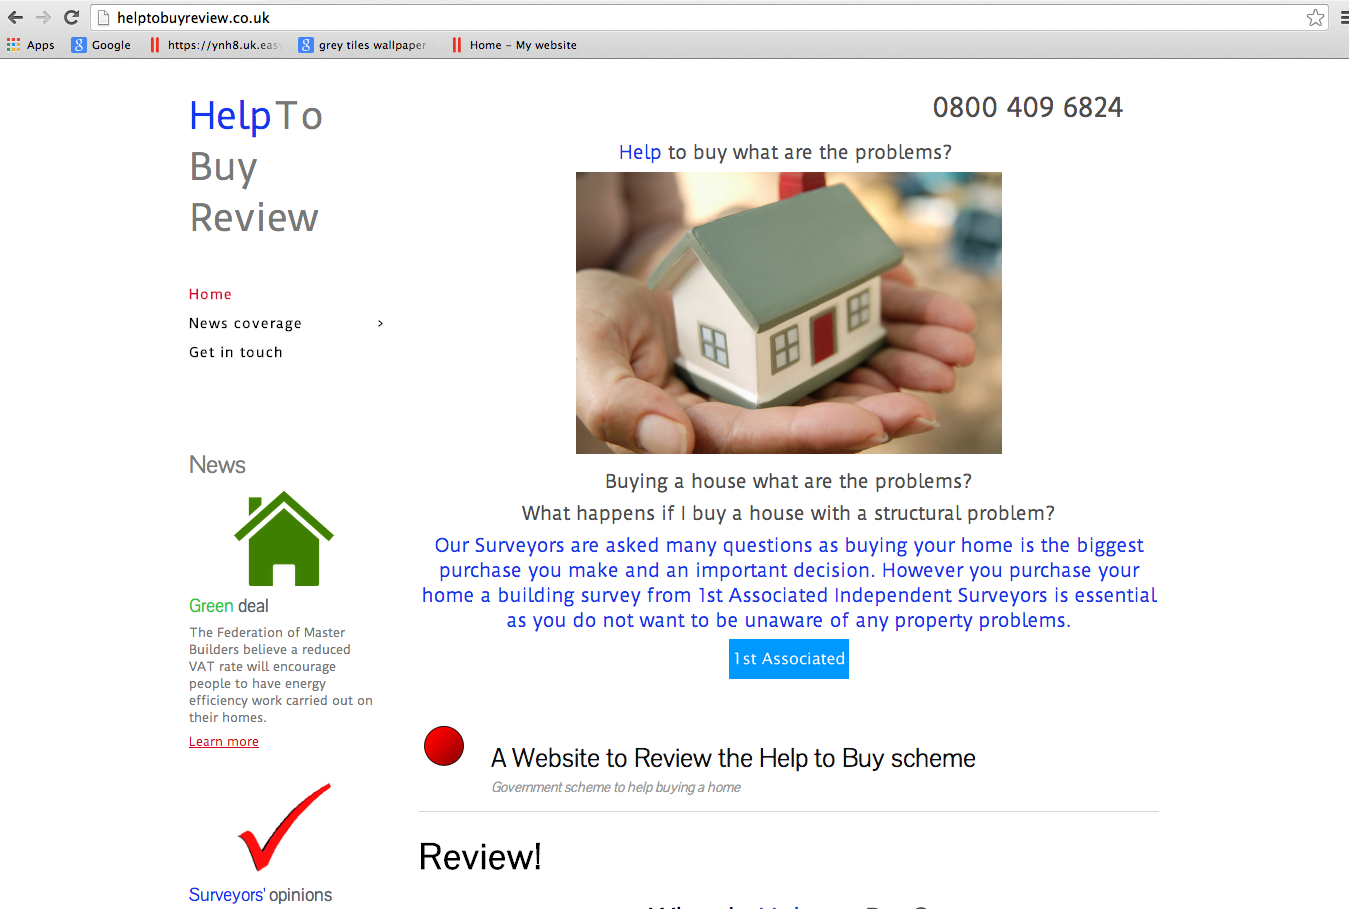 Website Brief - Take a look at HelpToBuyReview.co.uk